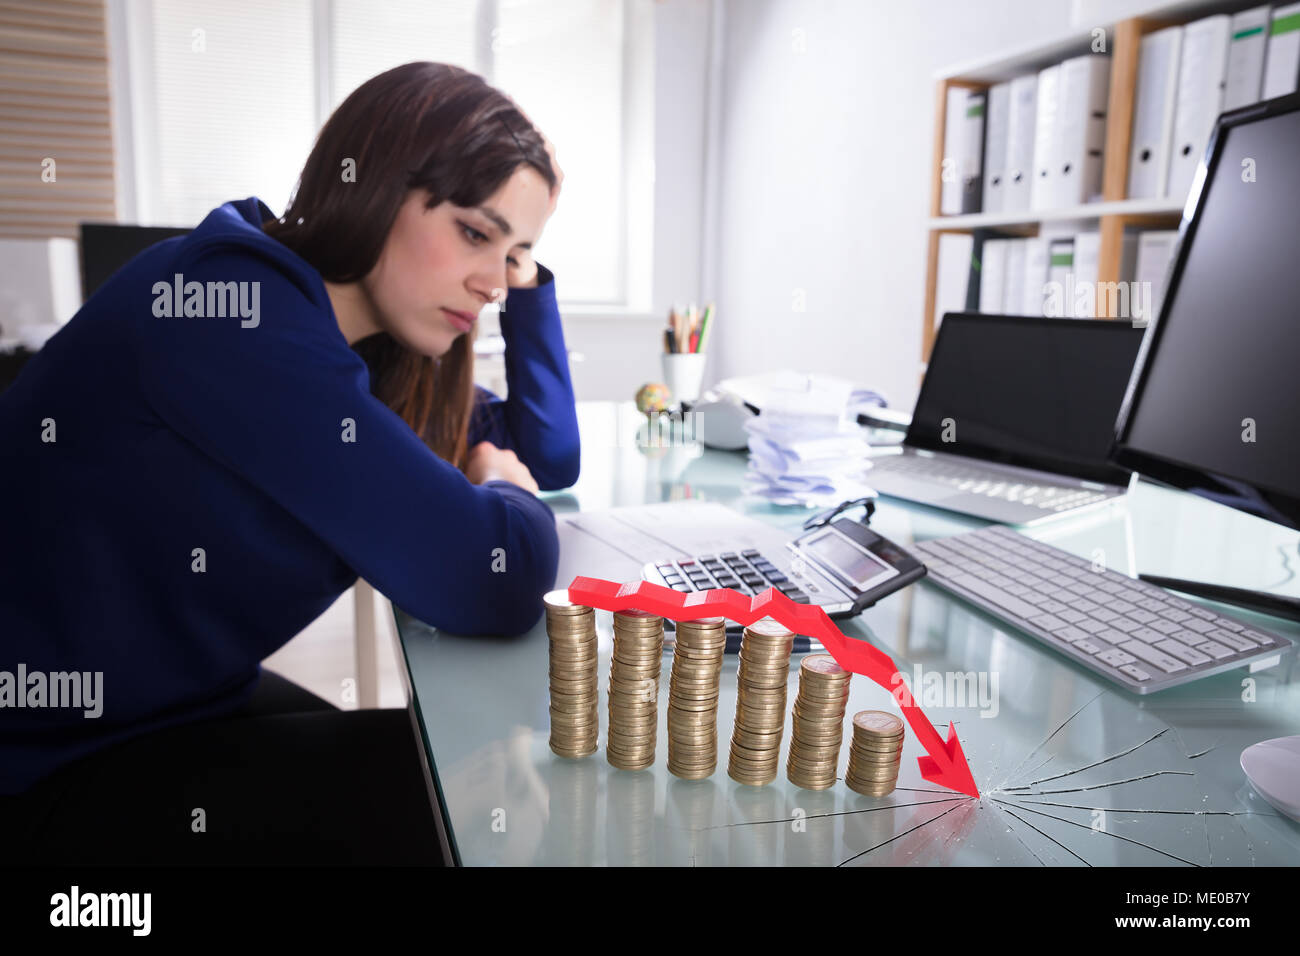 Red Arrow Over Decreasing Stacked Coins Showing Downward Direction In Front Of Upset Businesswoman Stock Photo